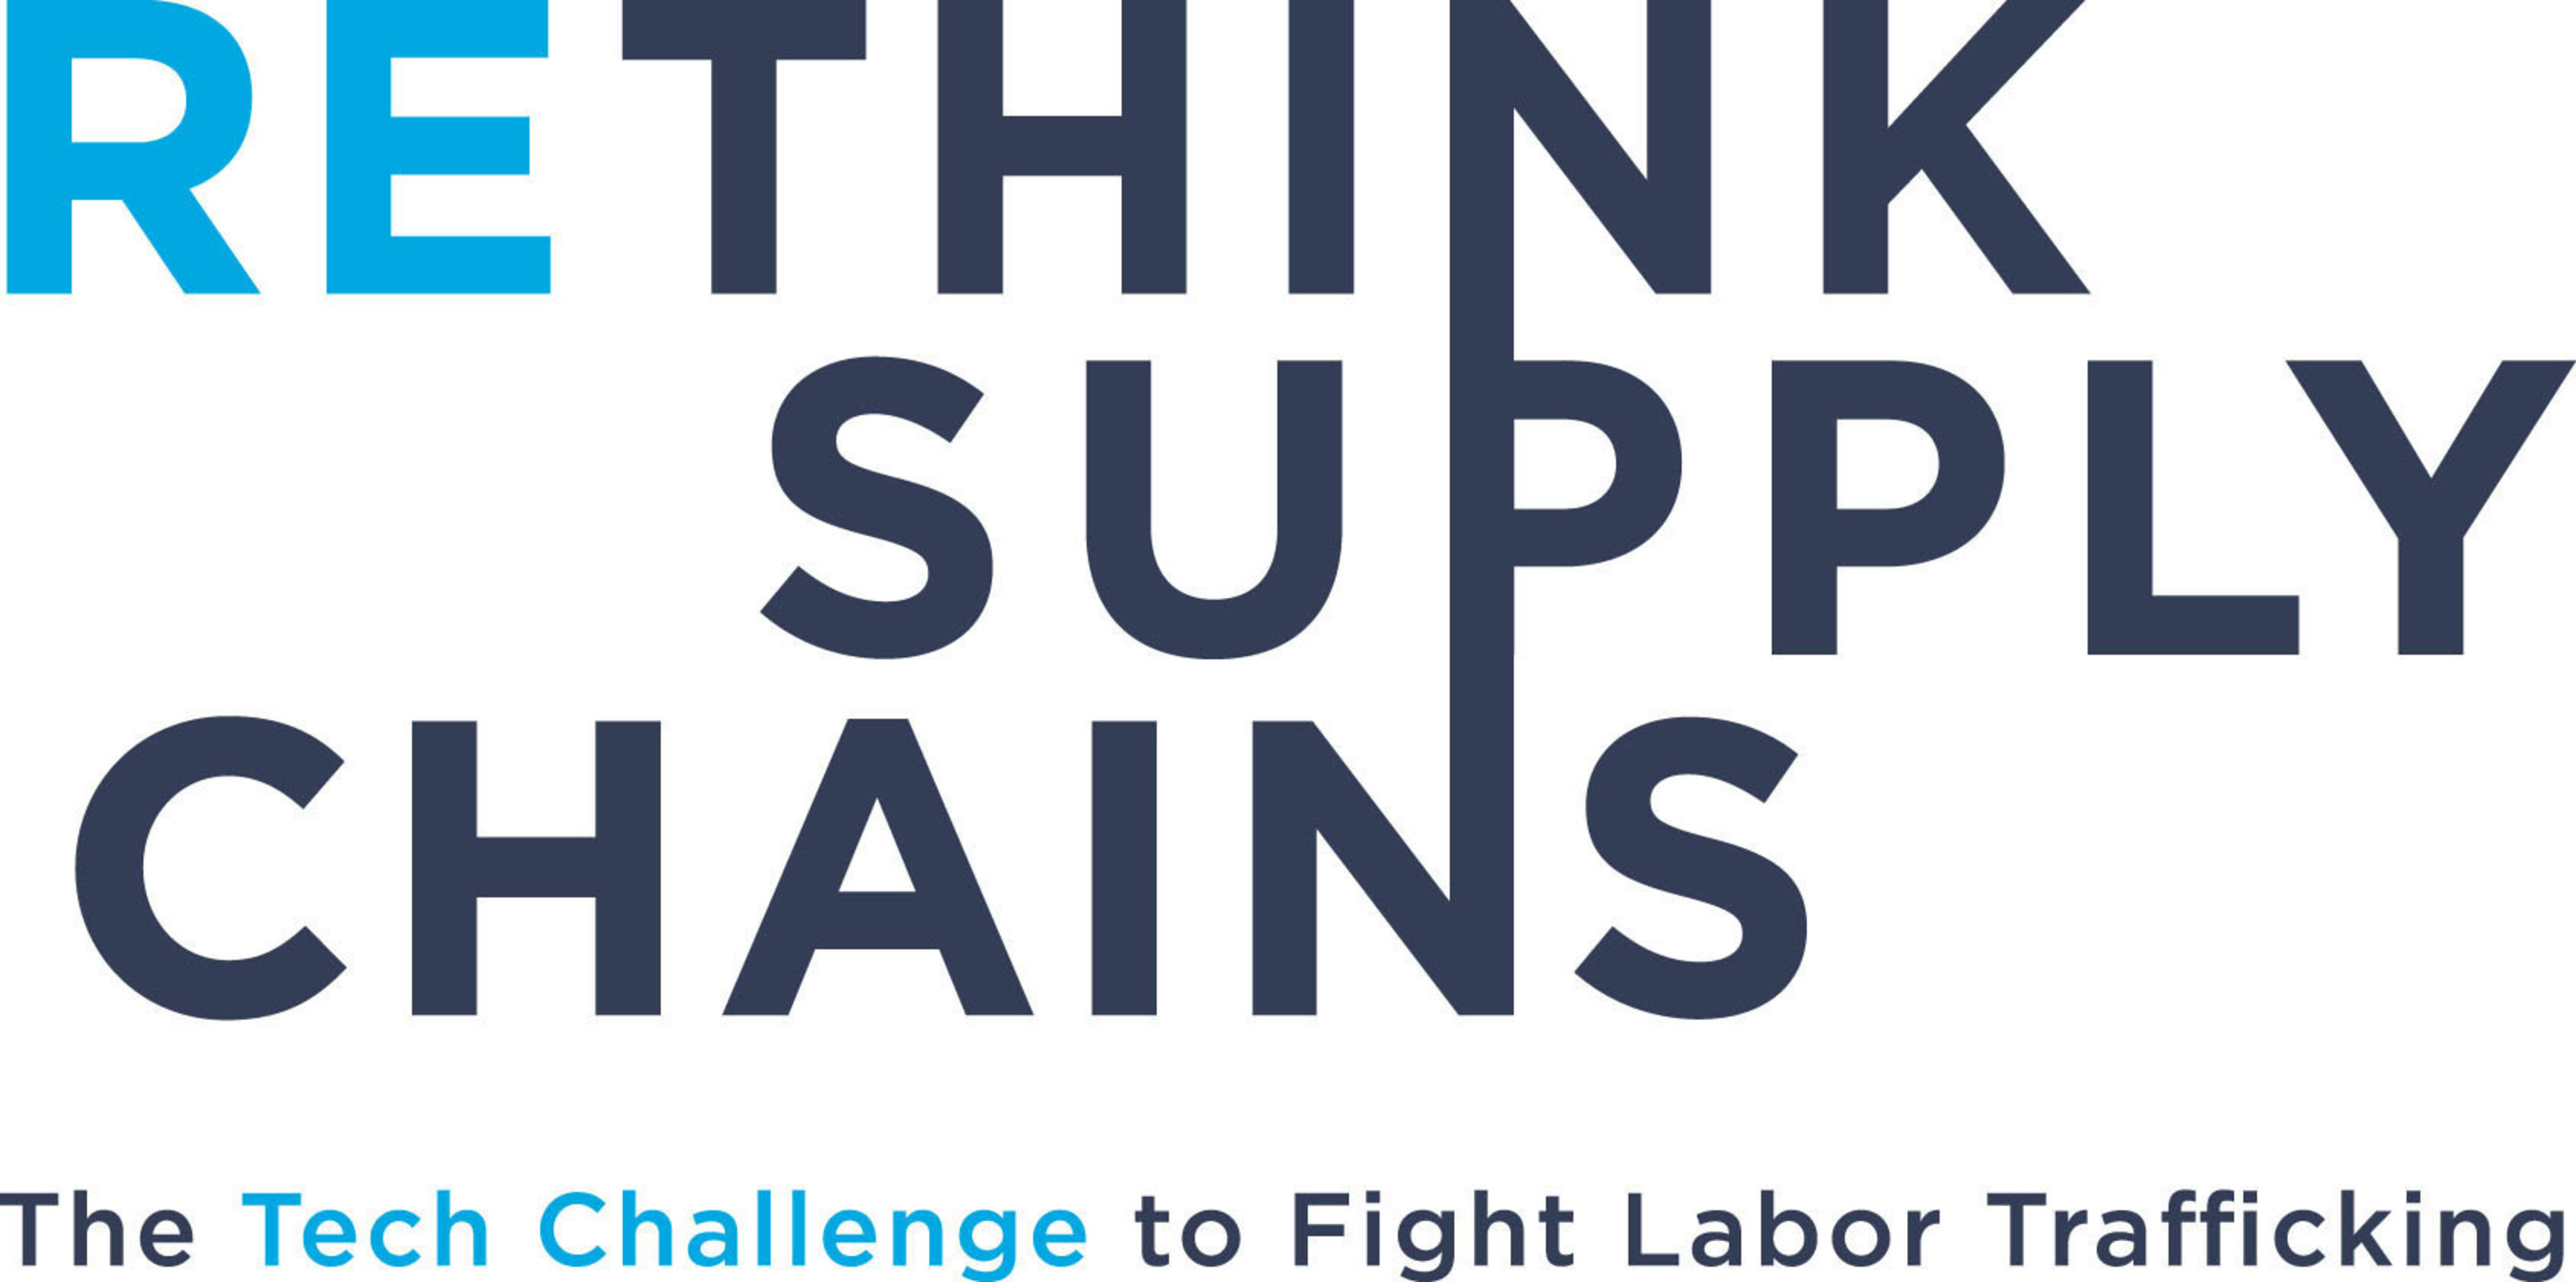 Rethink Supply Chains: The Tech Challenge to Fight Labor Trafficking